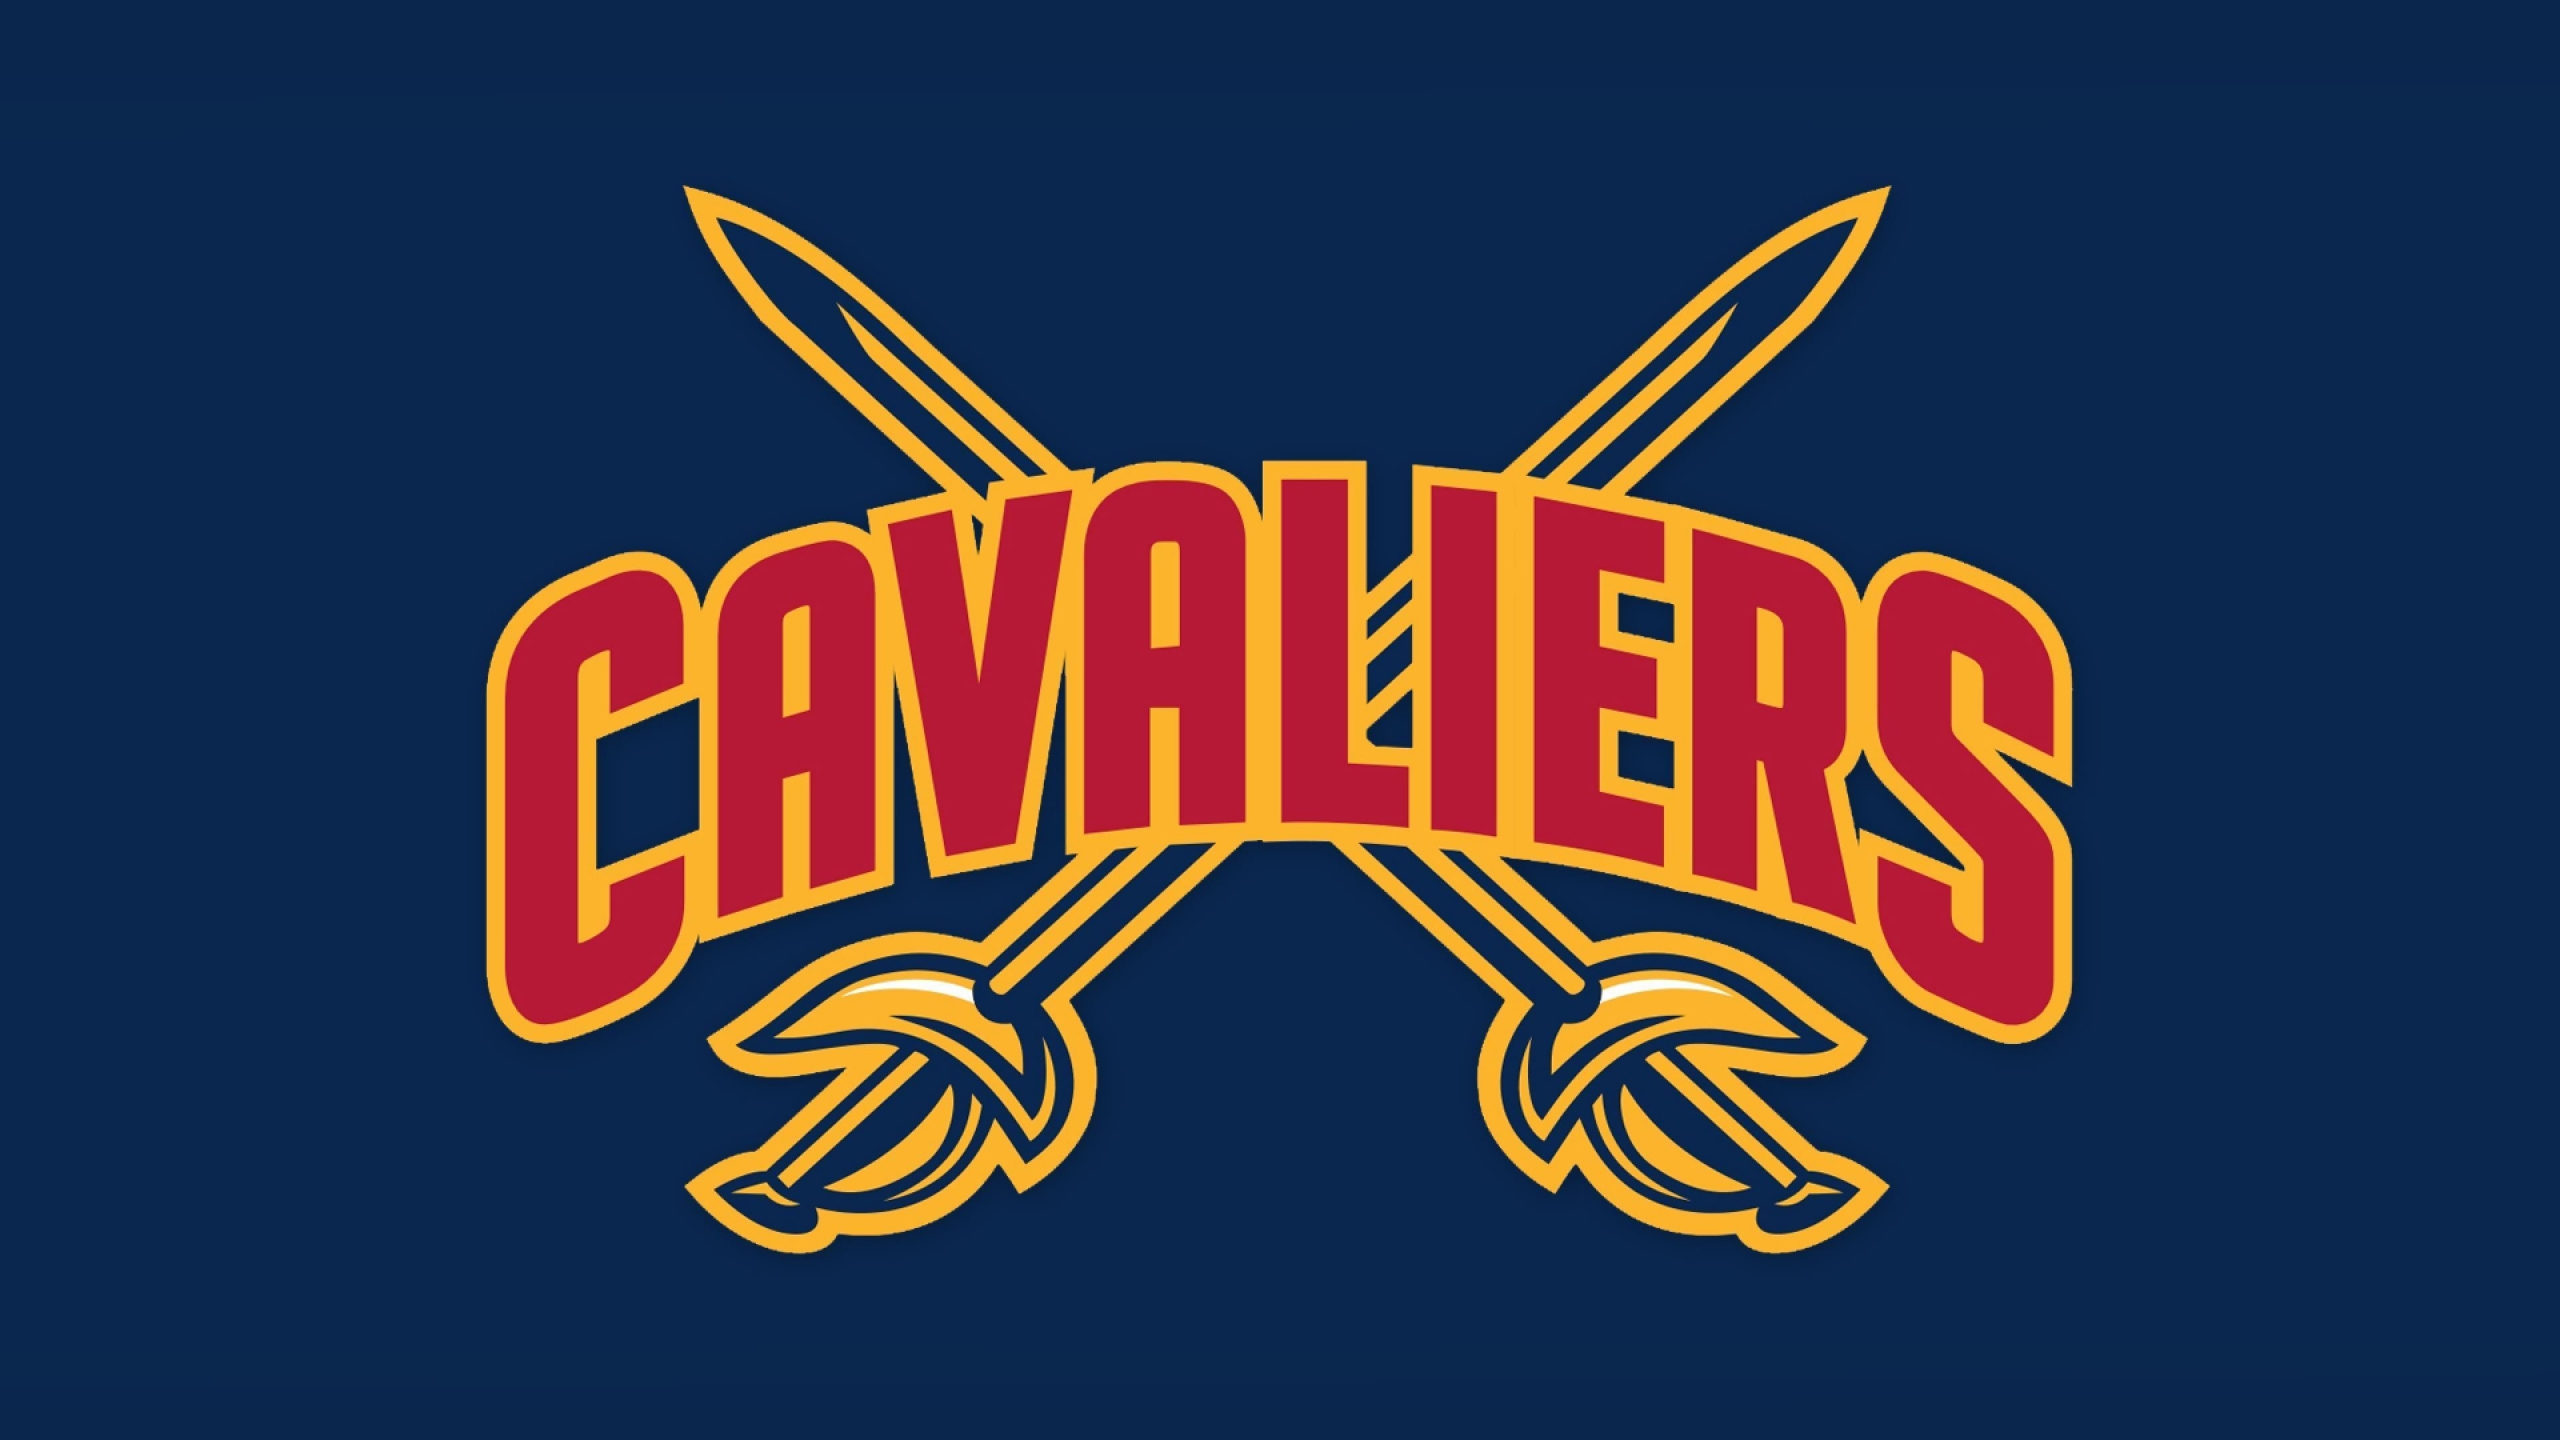 NBA Cleveland Cavaliers Logo for 2560x1440 HDTV resolution